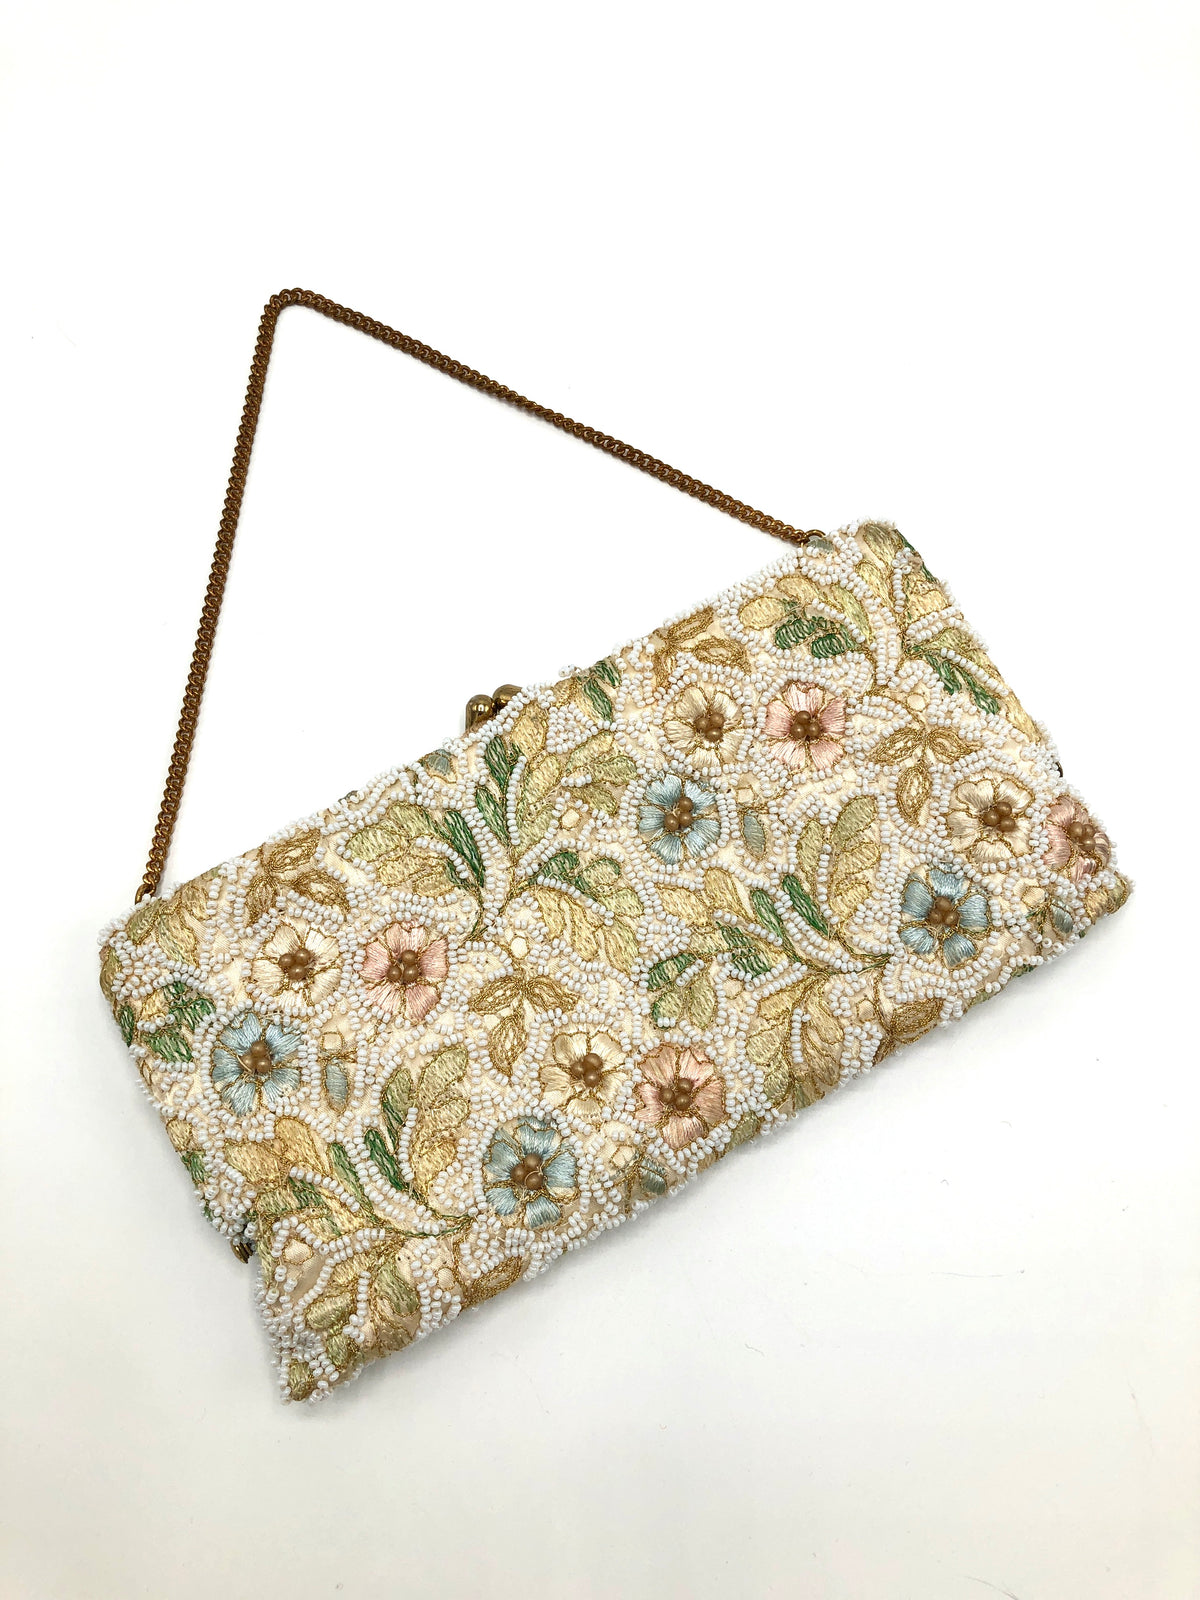 Vintage Beaded and Embroidered Floral Bag